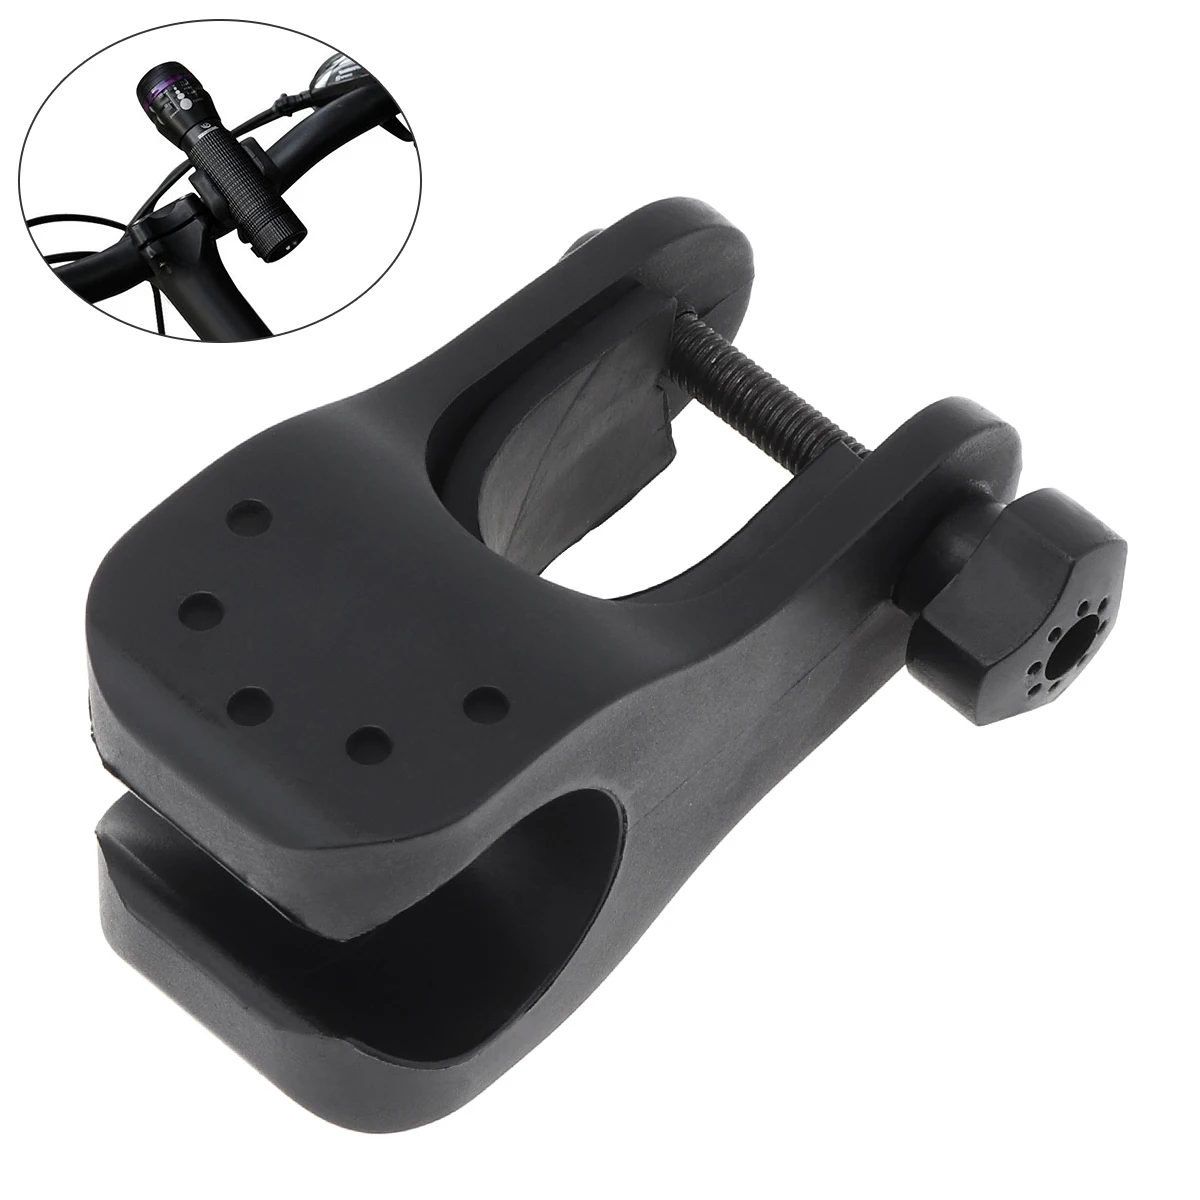 Shatterproof Bicycle Cycle Light Stand Bike Front Mount LED Headlight Holder Clip Rubber for 22-35mm Diameter Flashlight yangmin free shipping new product anodized aluminum bar wide size 35 35mm square profile aluminum channel for led strip light